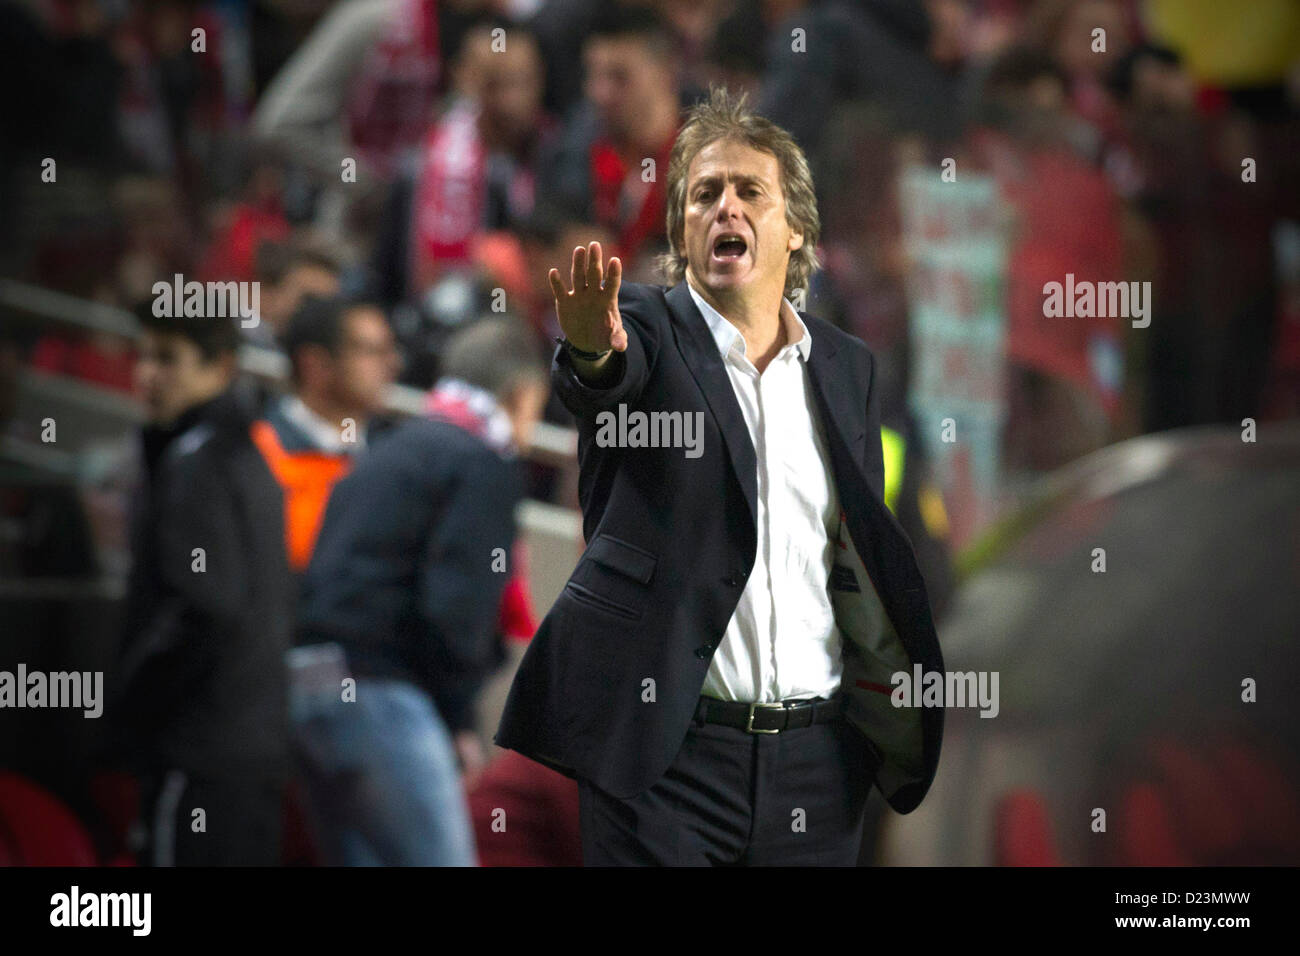 13.01.2013. Lisbon, Portugal - Jorge Jesus SL Benfica coach during the football derby between Benfica and FC Porto in round 14 of the Portuguese Zon Sagres League, at Benfica's Luz Stadium in Lisbon Stock Photo